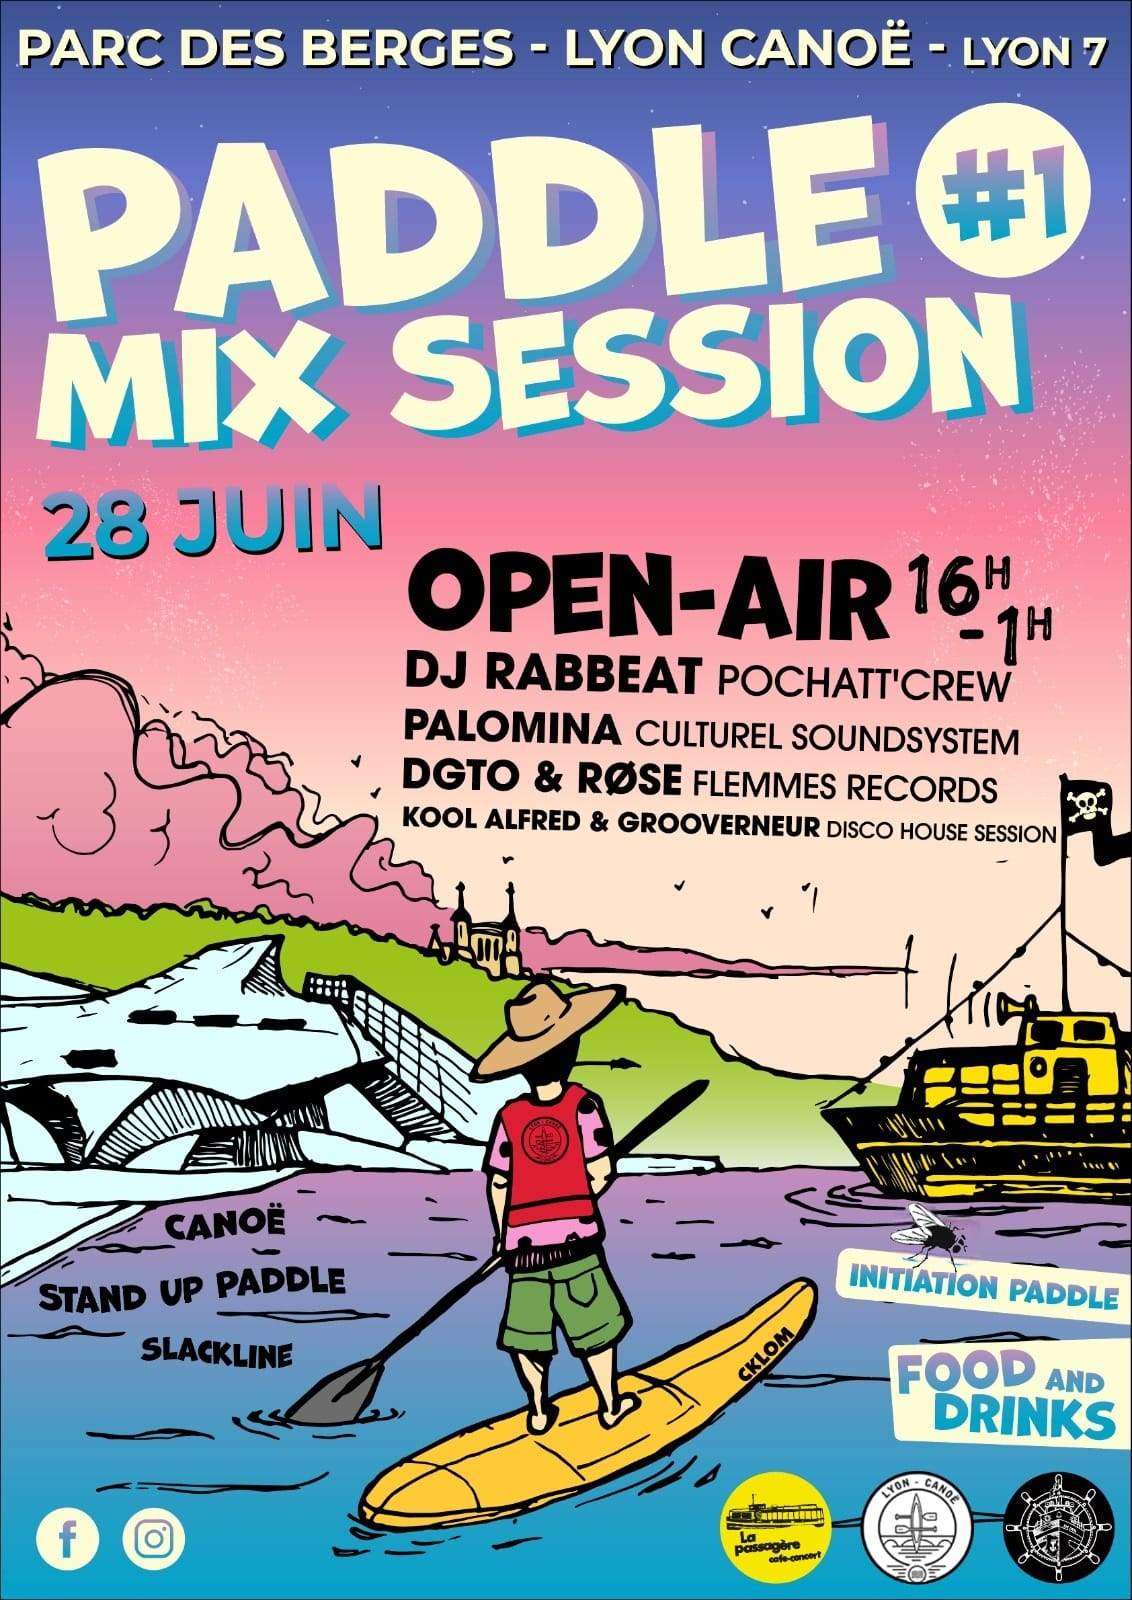 Paddle Mix Session #1 - Open Air - Página frontal